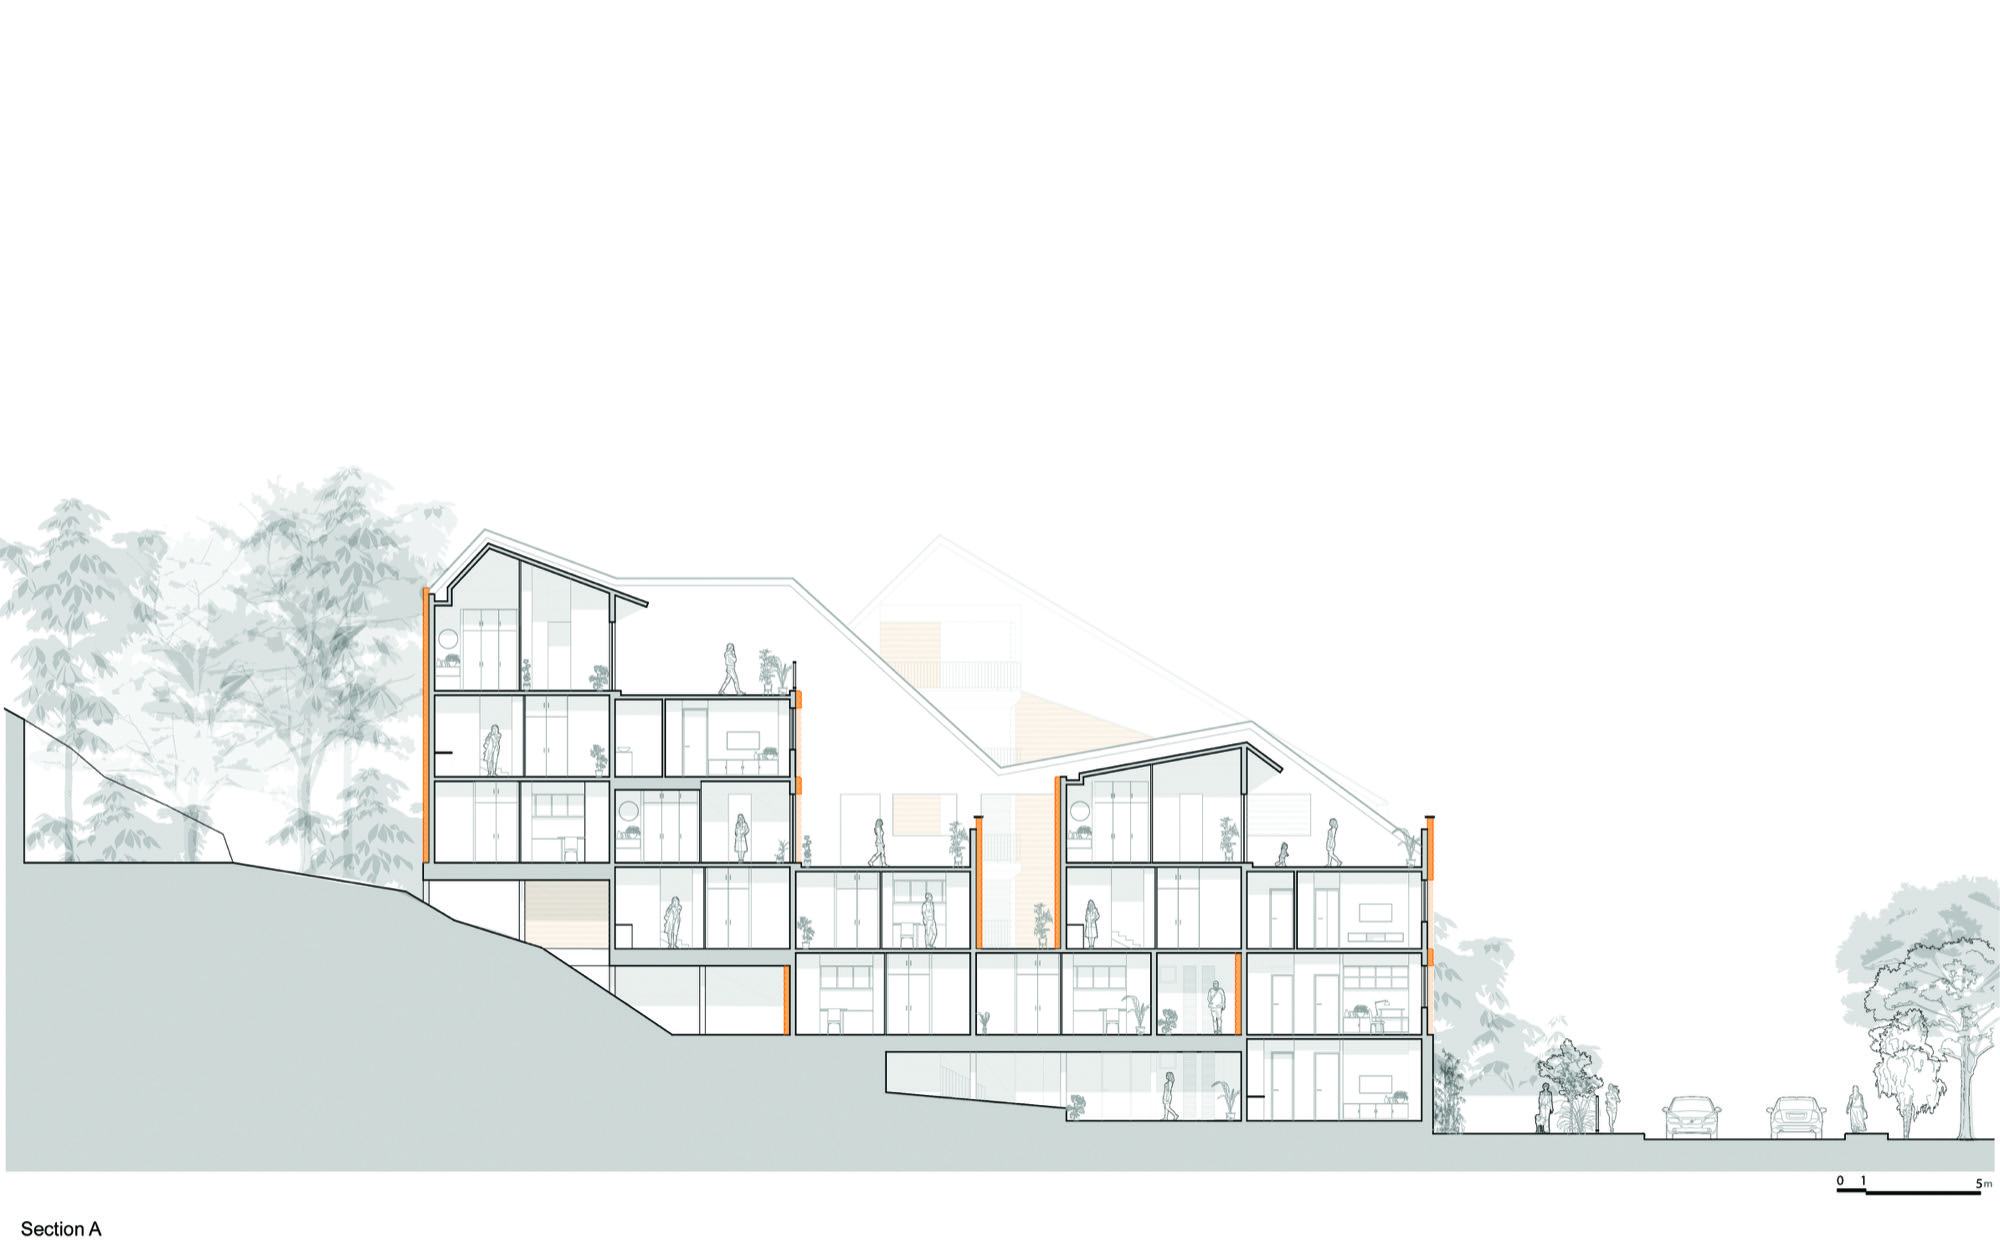 Goa Micro Housing - An unbuilt housing project by Between Spaces Architects 10